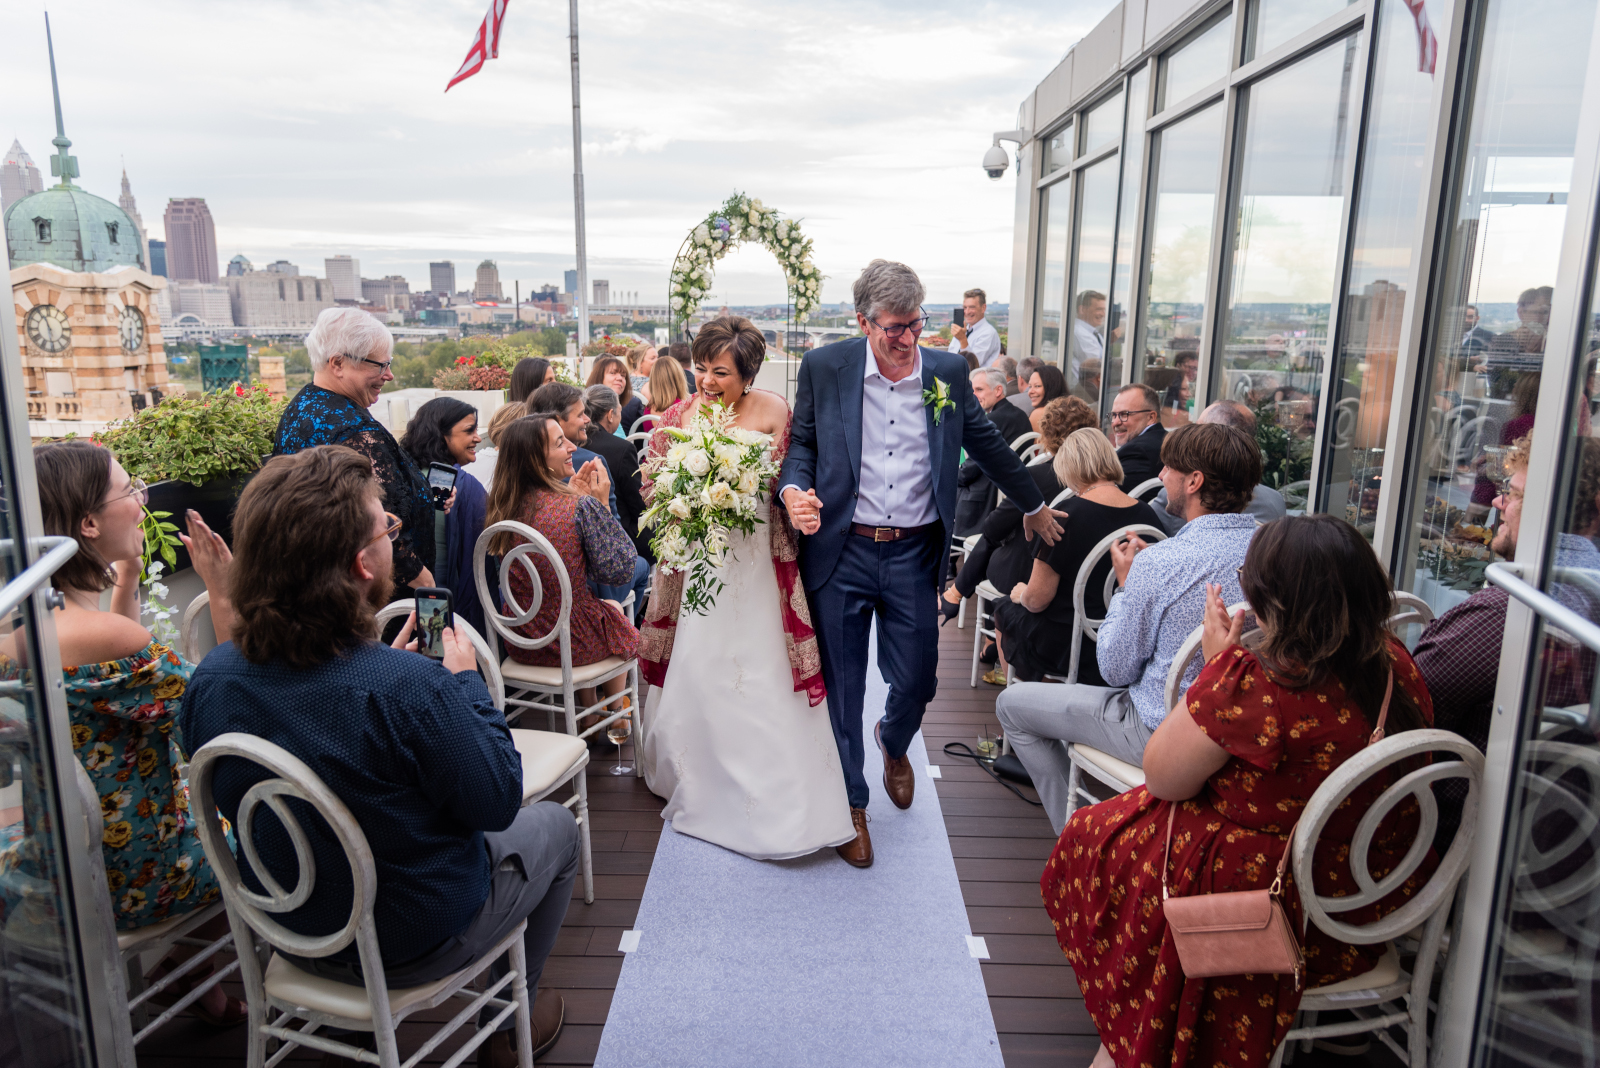 Bride and groom walking down the aisle, bridal recessional, wedding ceremony, smiling, laughing, sweet, cute, older couple, romantic outdoor urban wedding ceremony at Penthouse Events, Ohio City, Cleveland Flats, downtown Cleveland skyline, West Side Market, Lake Erie